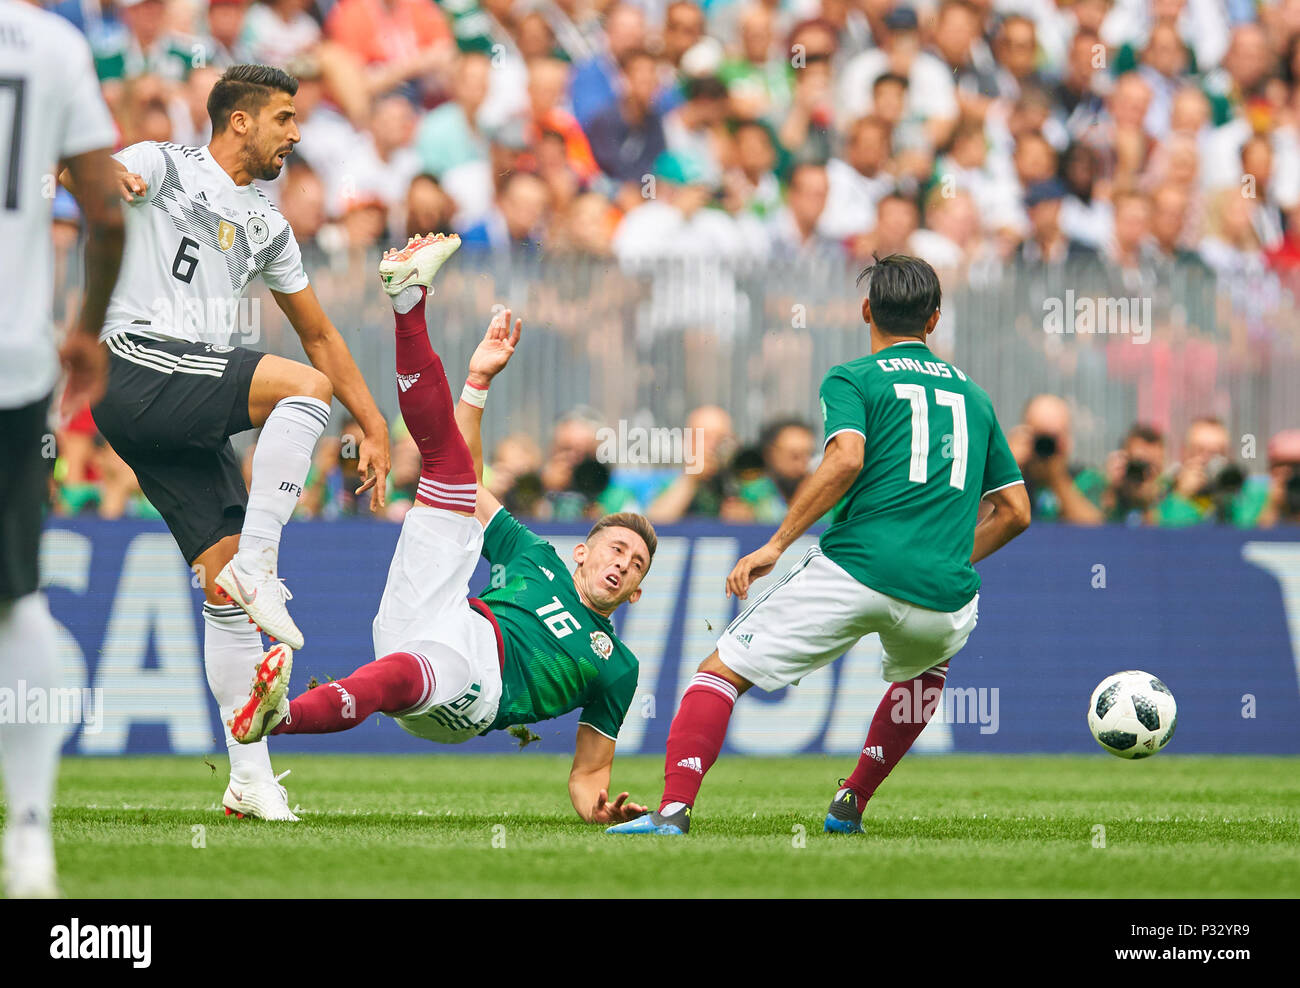 Moscow, Russia, 17 June 2018. Germany - Mexico, Soccer, Moscow, June 17, 2018 Sami KHEDIRA, DFB 6  compete for the ball, tackling, duel, header against Hector HERRERA, Mex 16 Carlos VELA, MEX 11  GERMANY - MEXICO FIFA WORLD CUP 2018 RUSSIA, Group F, Season 2018/2019,  June 17, 2018 L u z h n i k i Stadium in Moscow, Russia.  © Peter Schatz / Alamy Live News Stock Photo